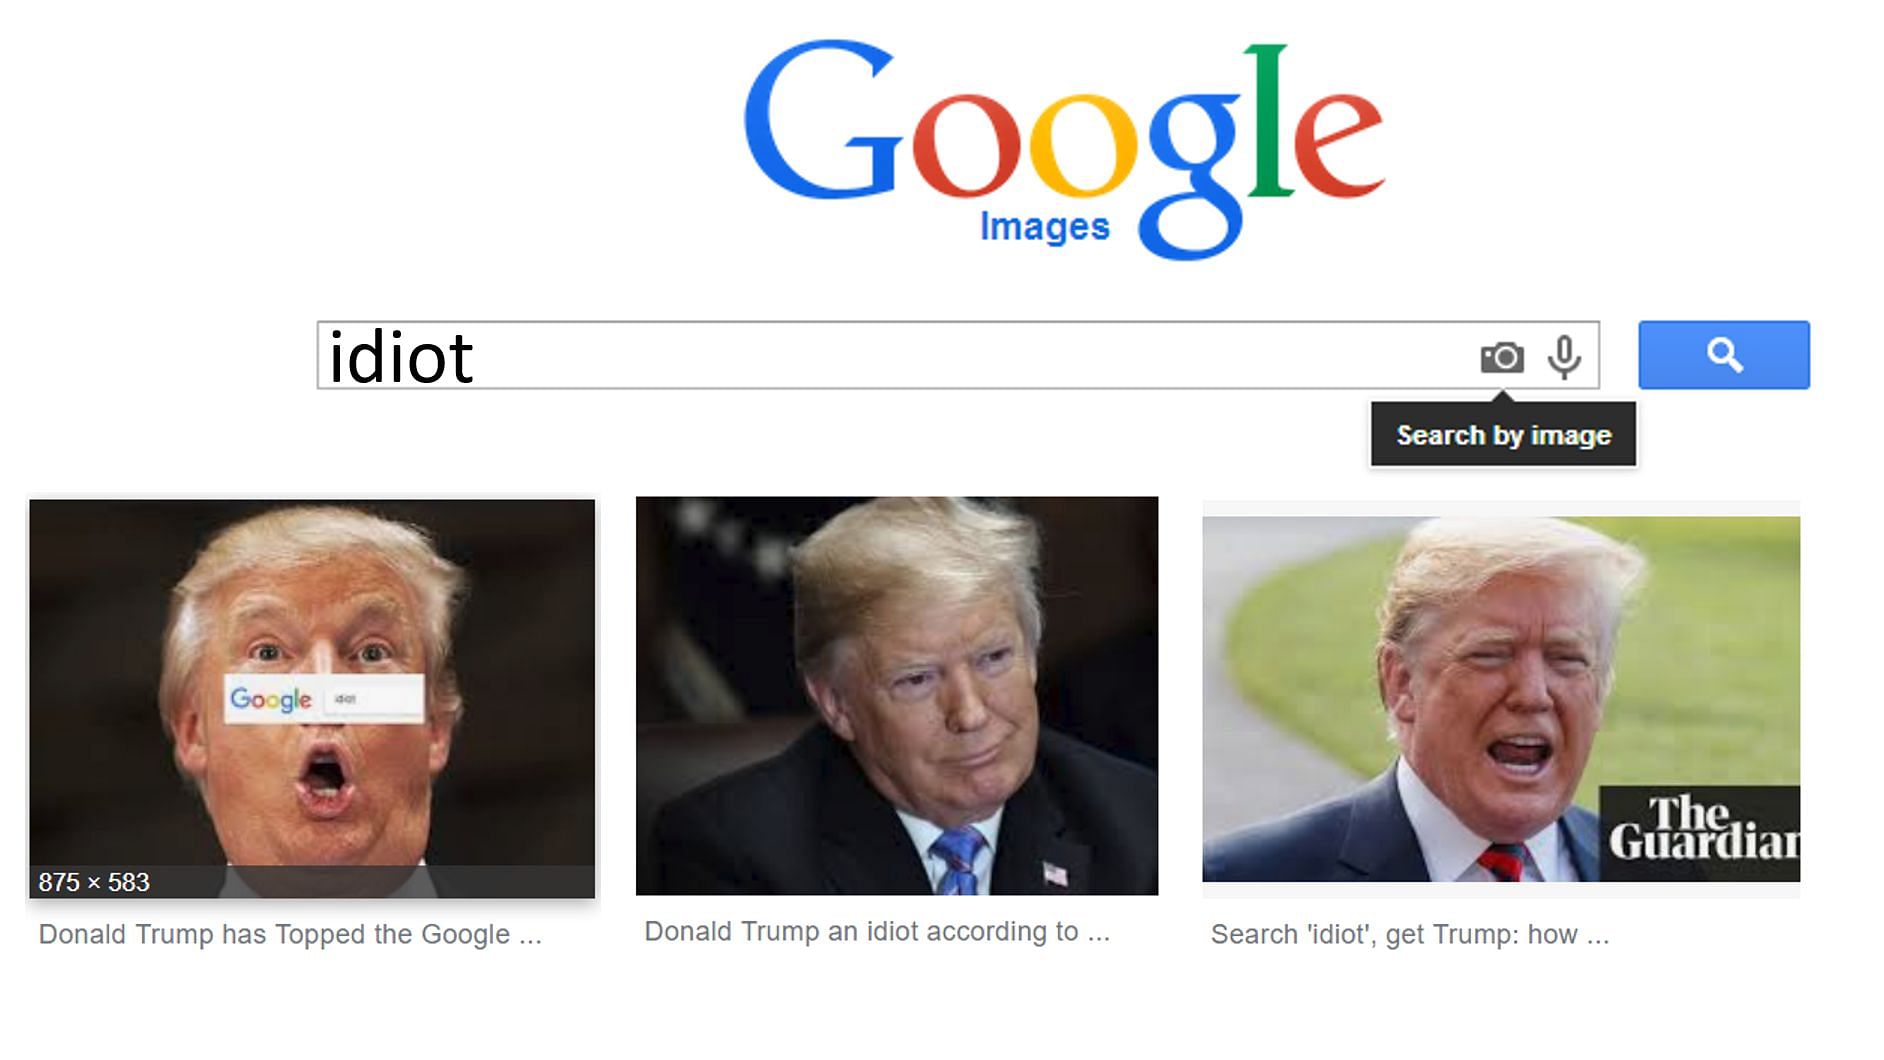 Google CEO Sundar Pichai was asked in the US Senate, why an image search for ‘idiot’ throws up images of Donald Trump first.&nbsp;